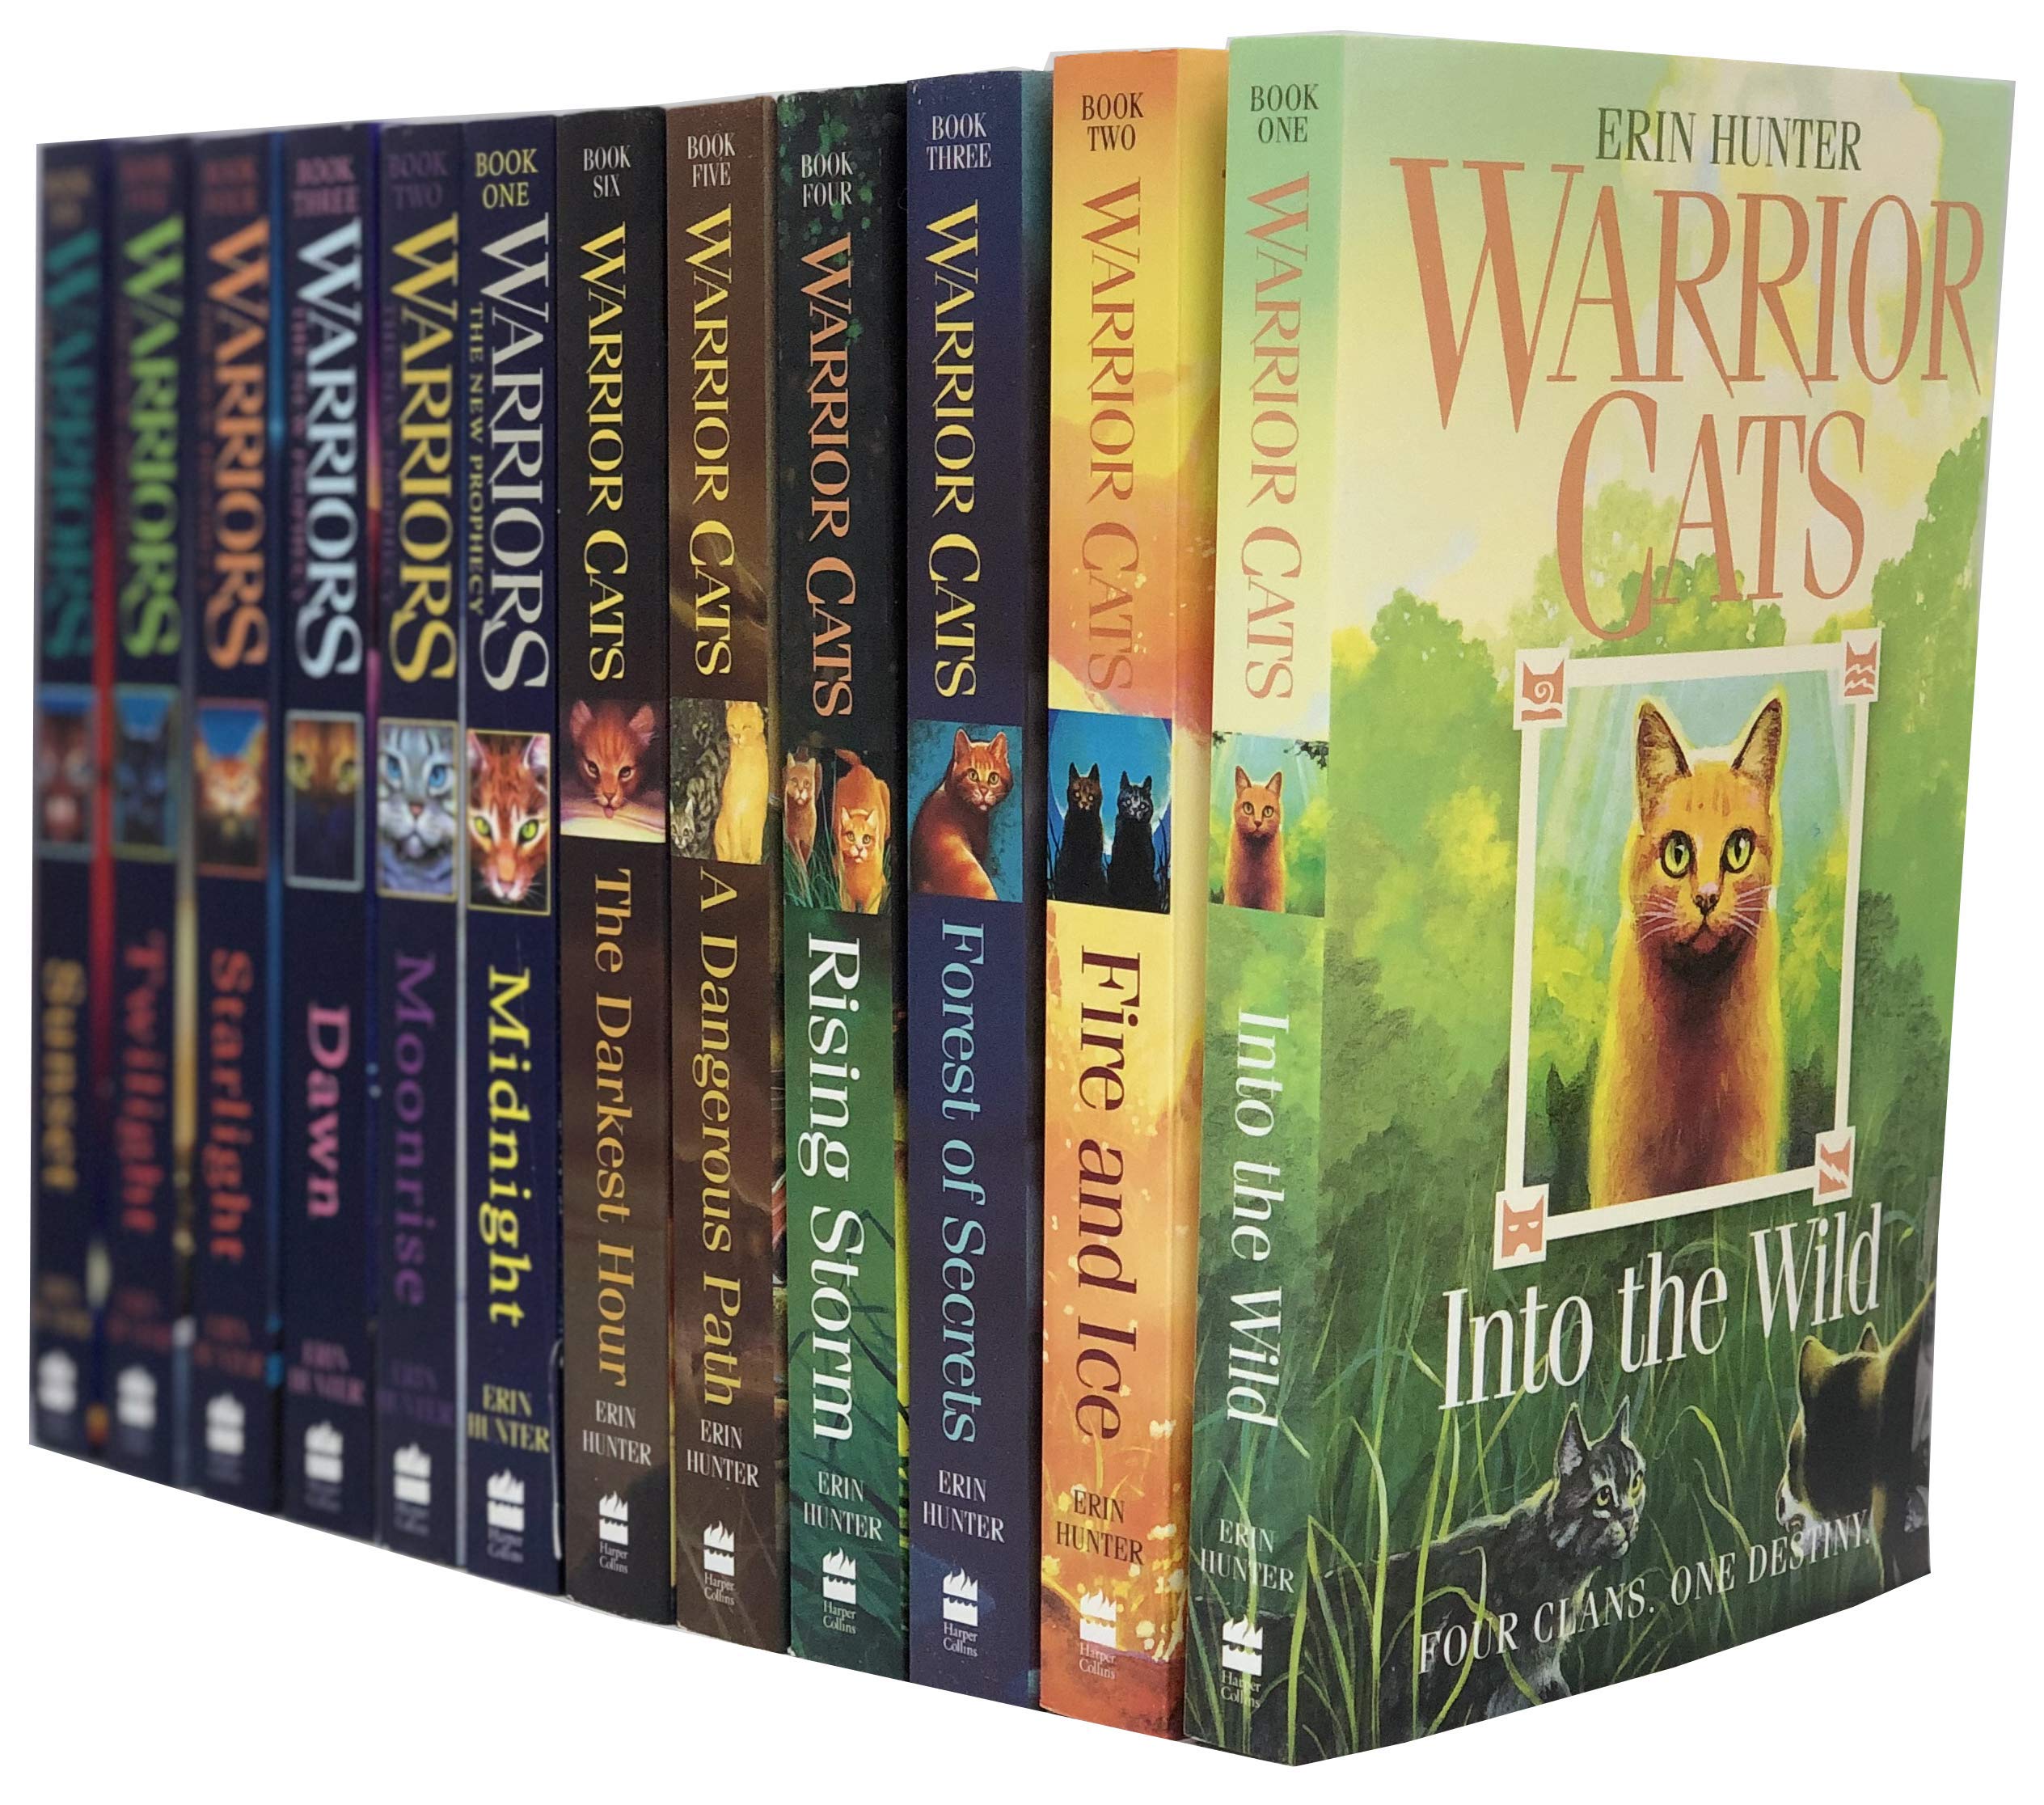 Warrior Cats Volume 1 to 12 Books Collection Set (The Complete First Series (Warriors: The Prophecies Begin Volume 1 to 6) & The Complete Second Se...